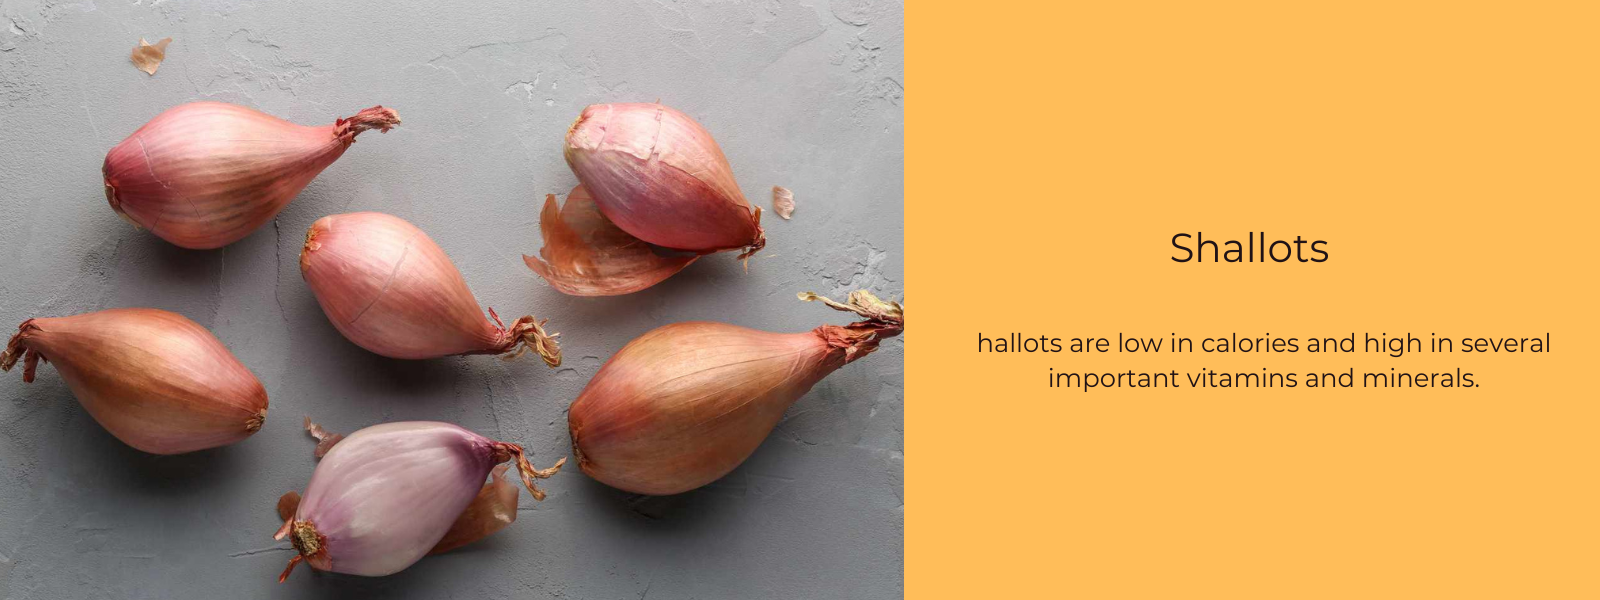 Shallots - Health Benefits, Uses and Important Facts